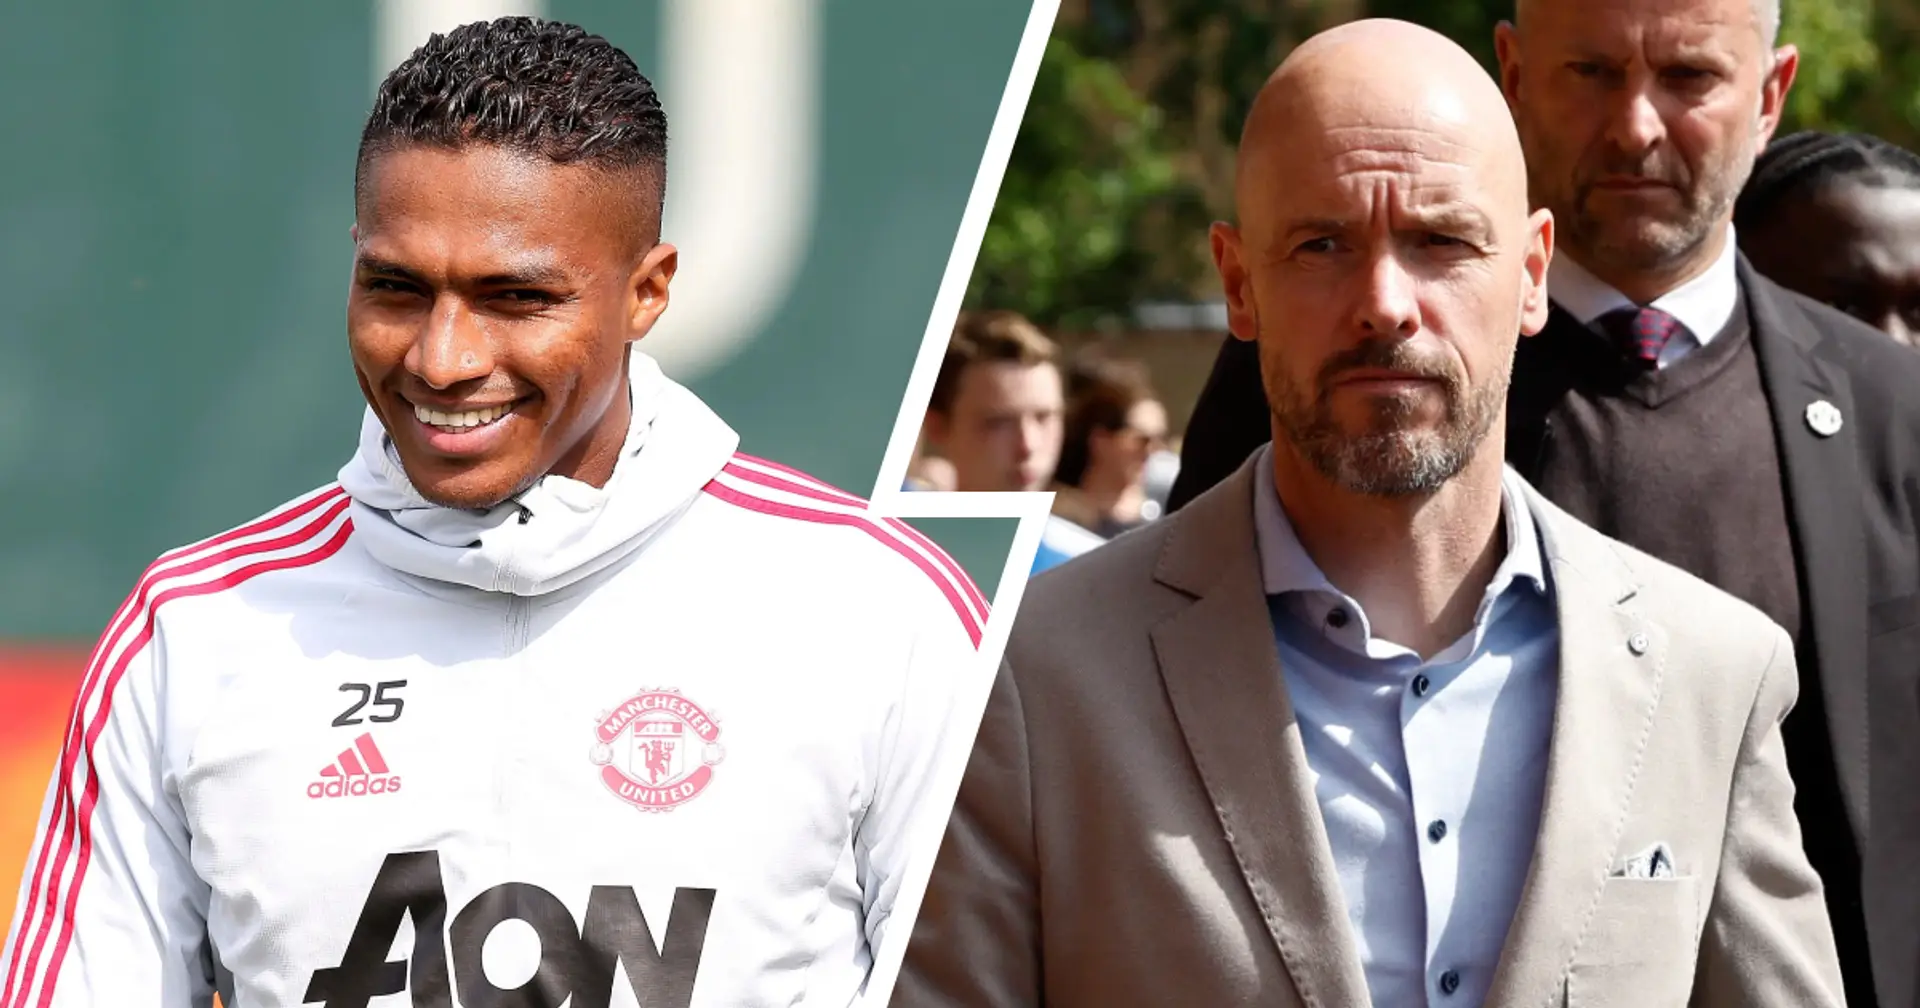 'He is a kid with great talent': Valencia names one United academy star who should shine under Ten Hag